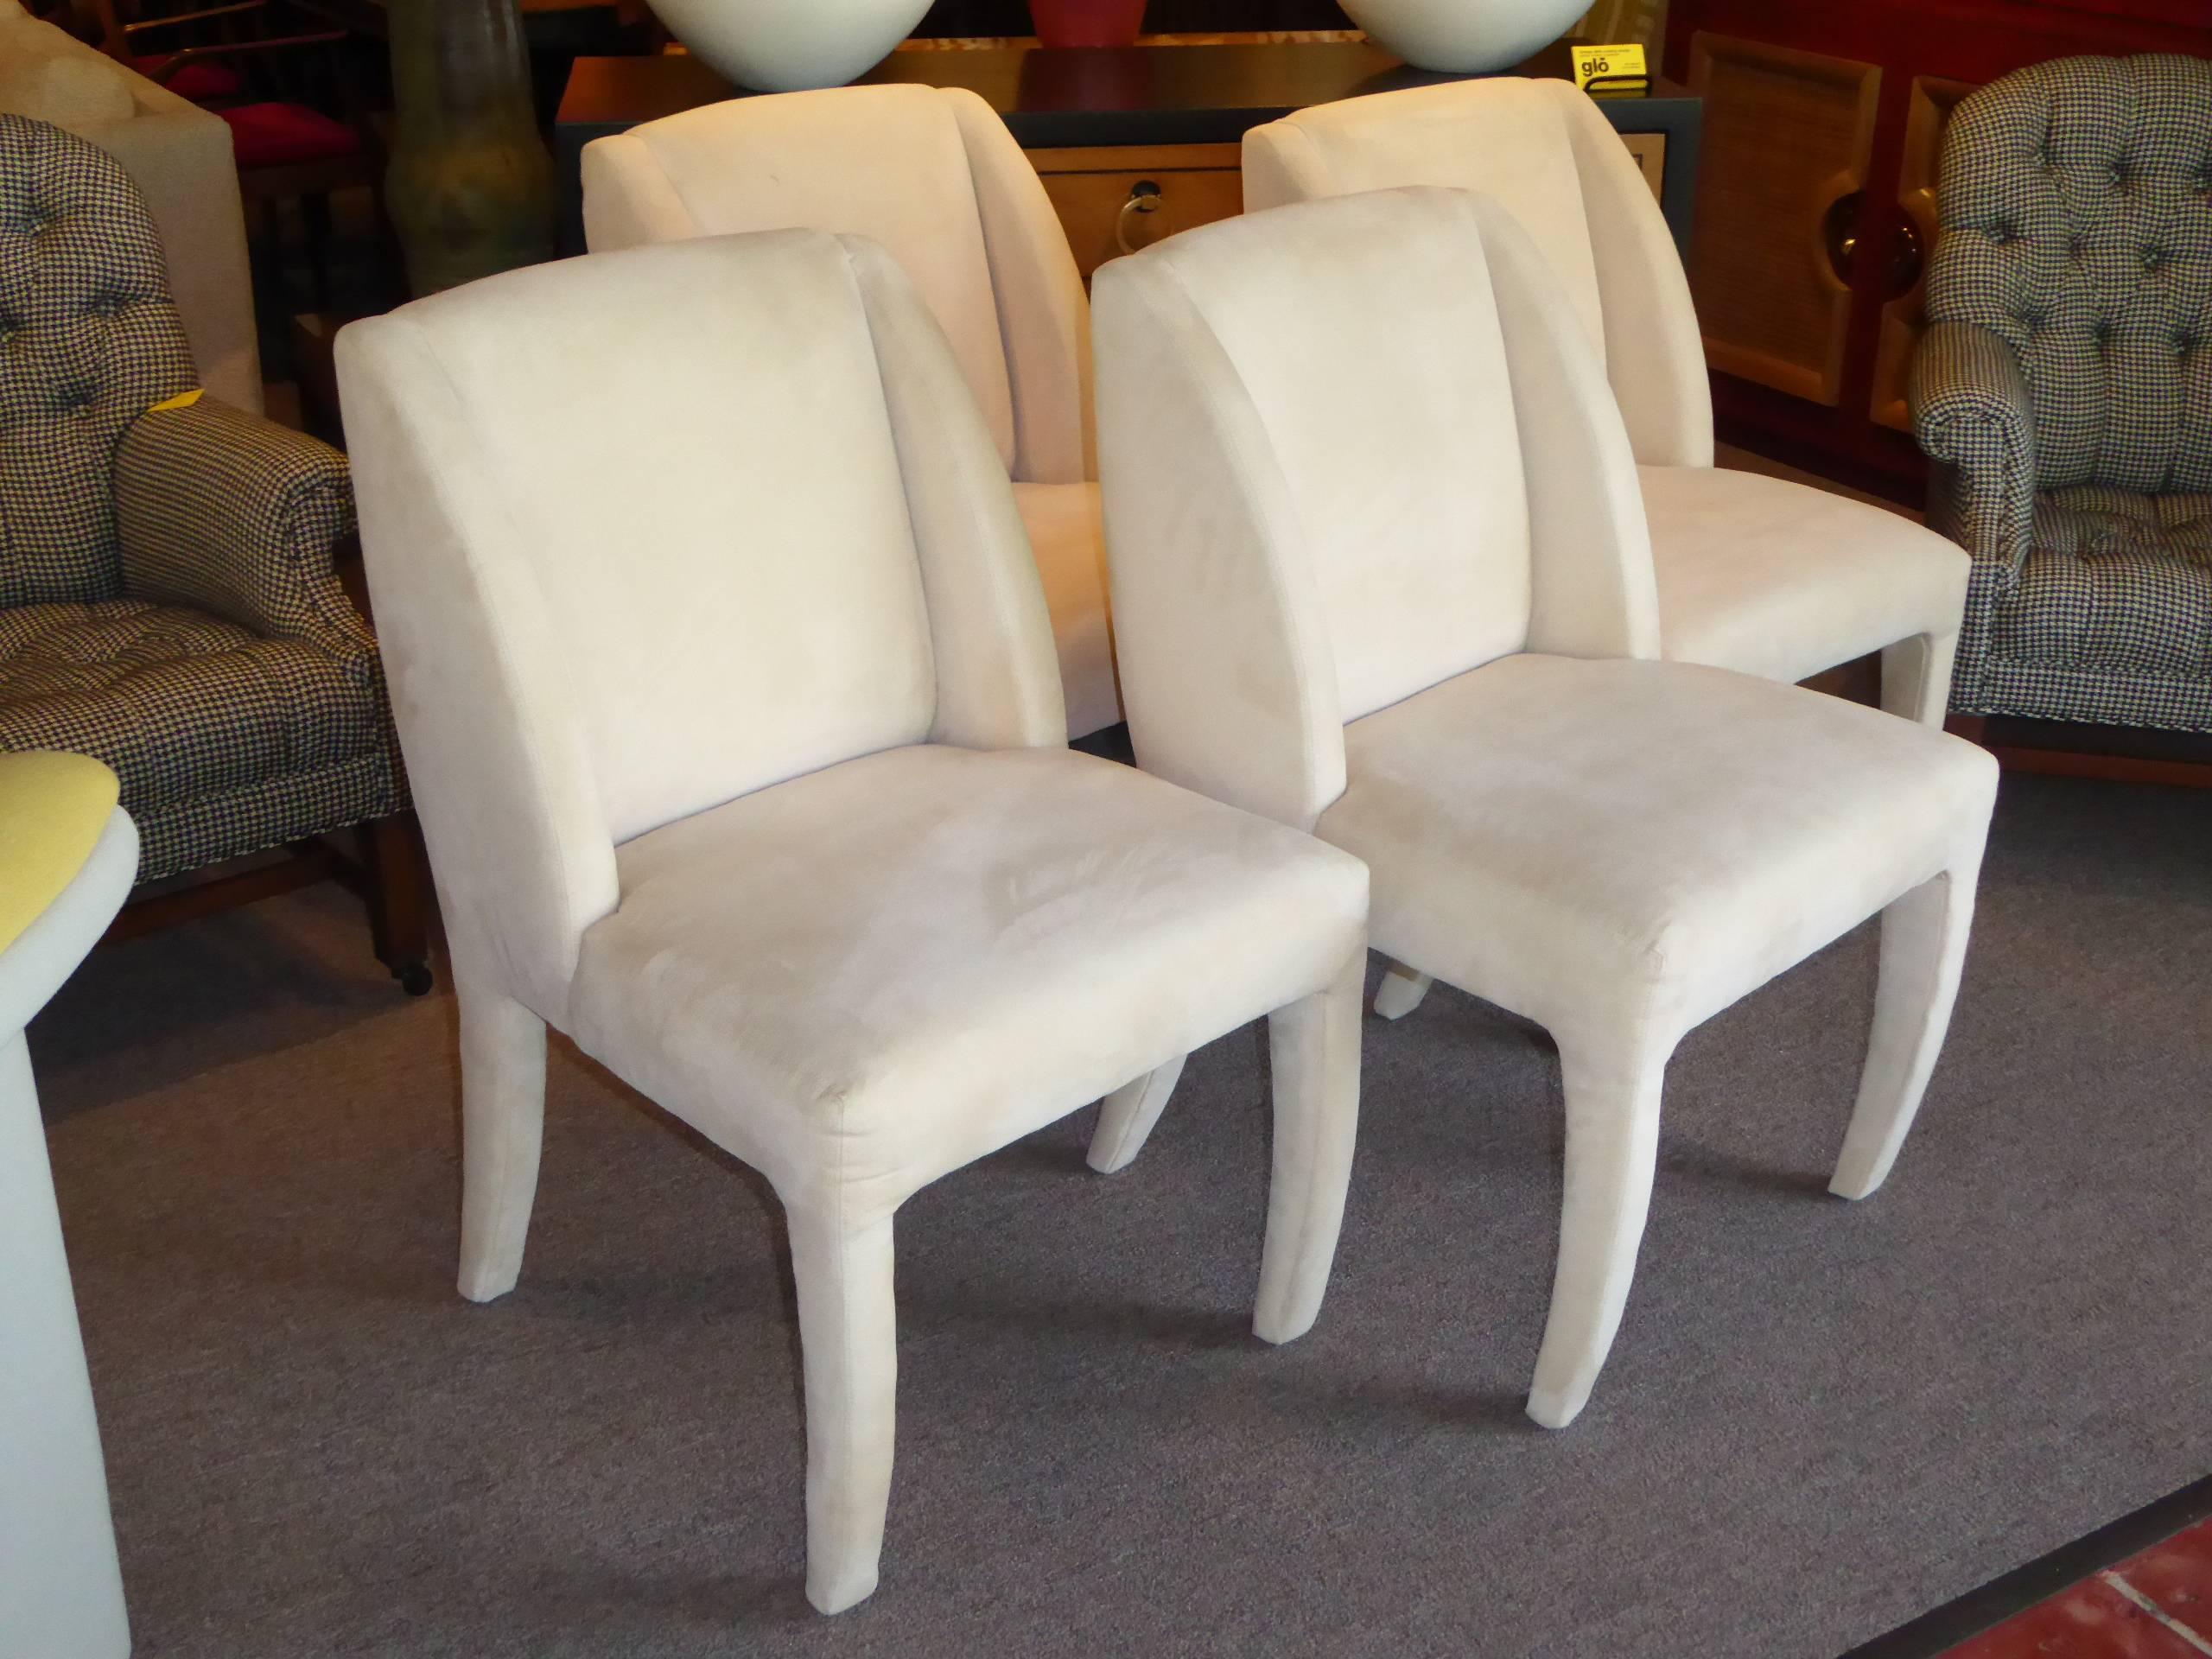 REDUCED FROM $4,850...Set of four 1980s sculptural dining chairs by Directional with original bone ultra suede upholstery. Elegant and plush. Tagged directional custom collection and with directional order tag. Original ultra suede with light wear,